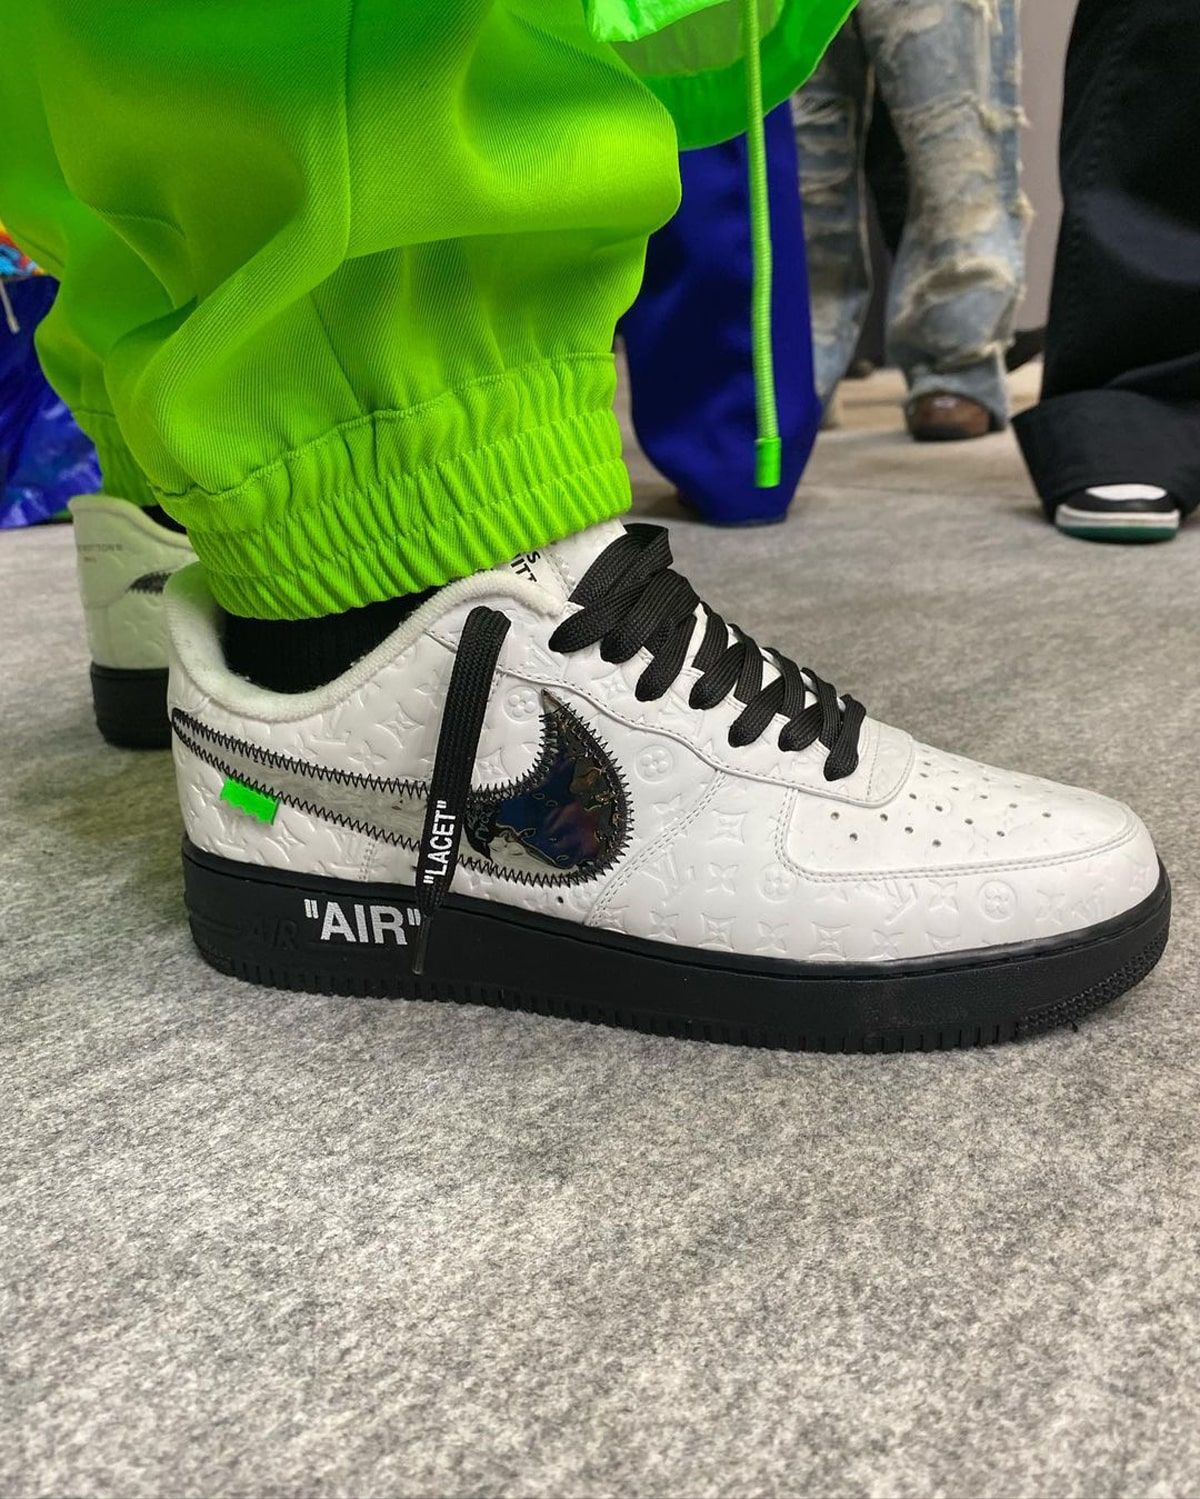 Louis Vuitton x Nike Air Force 1 By Virgil Abloh Will Release On